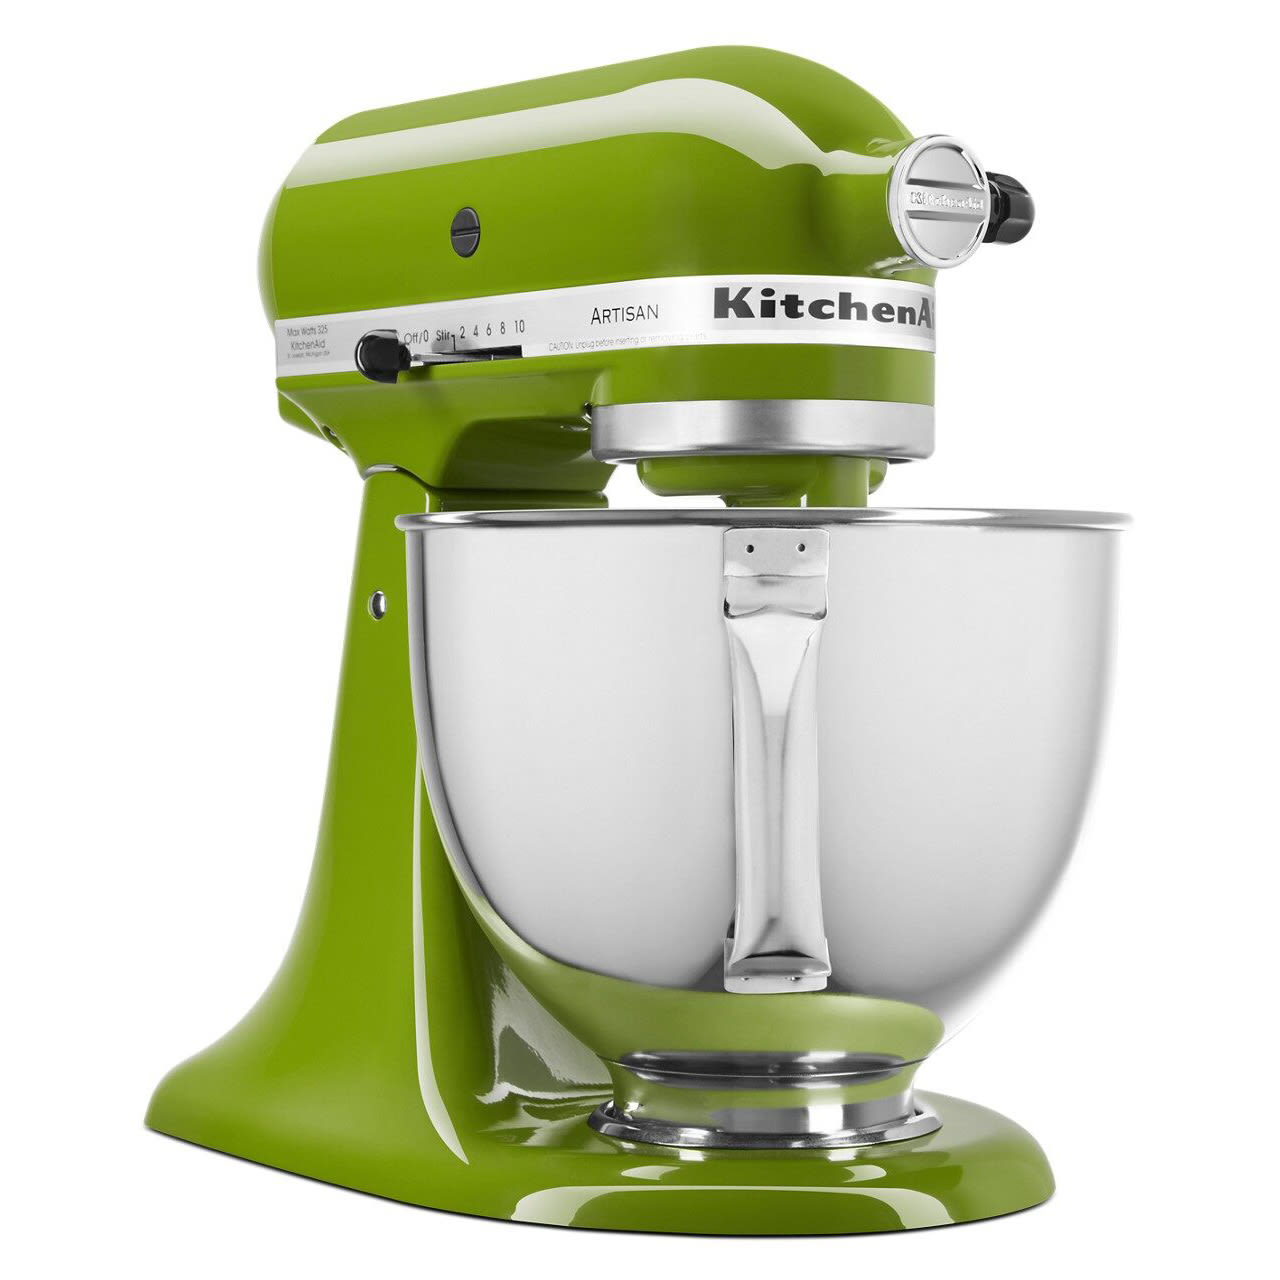 I'm in love with this avocado green K5A stand mixer but I can't